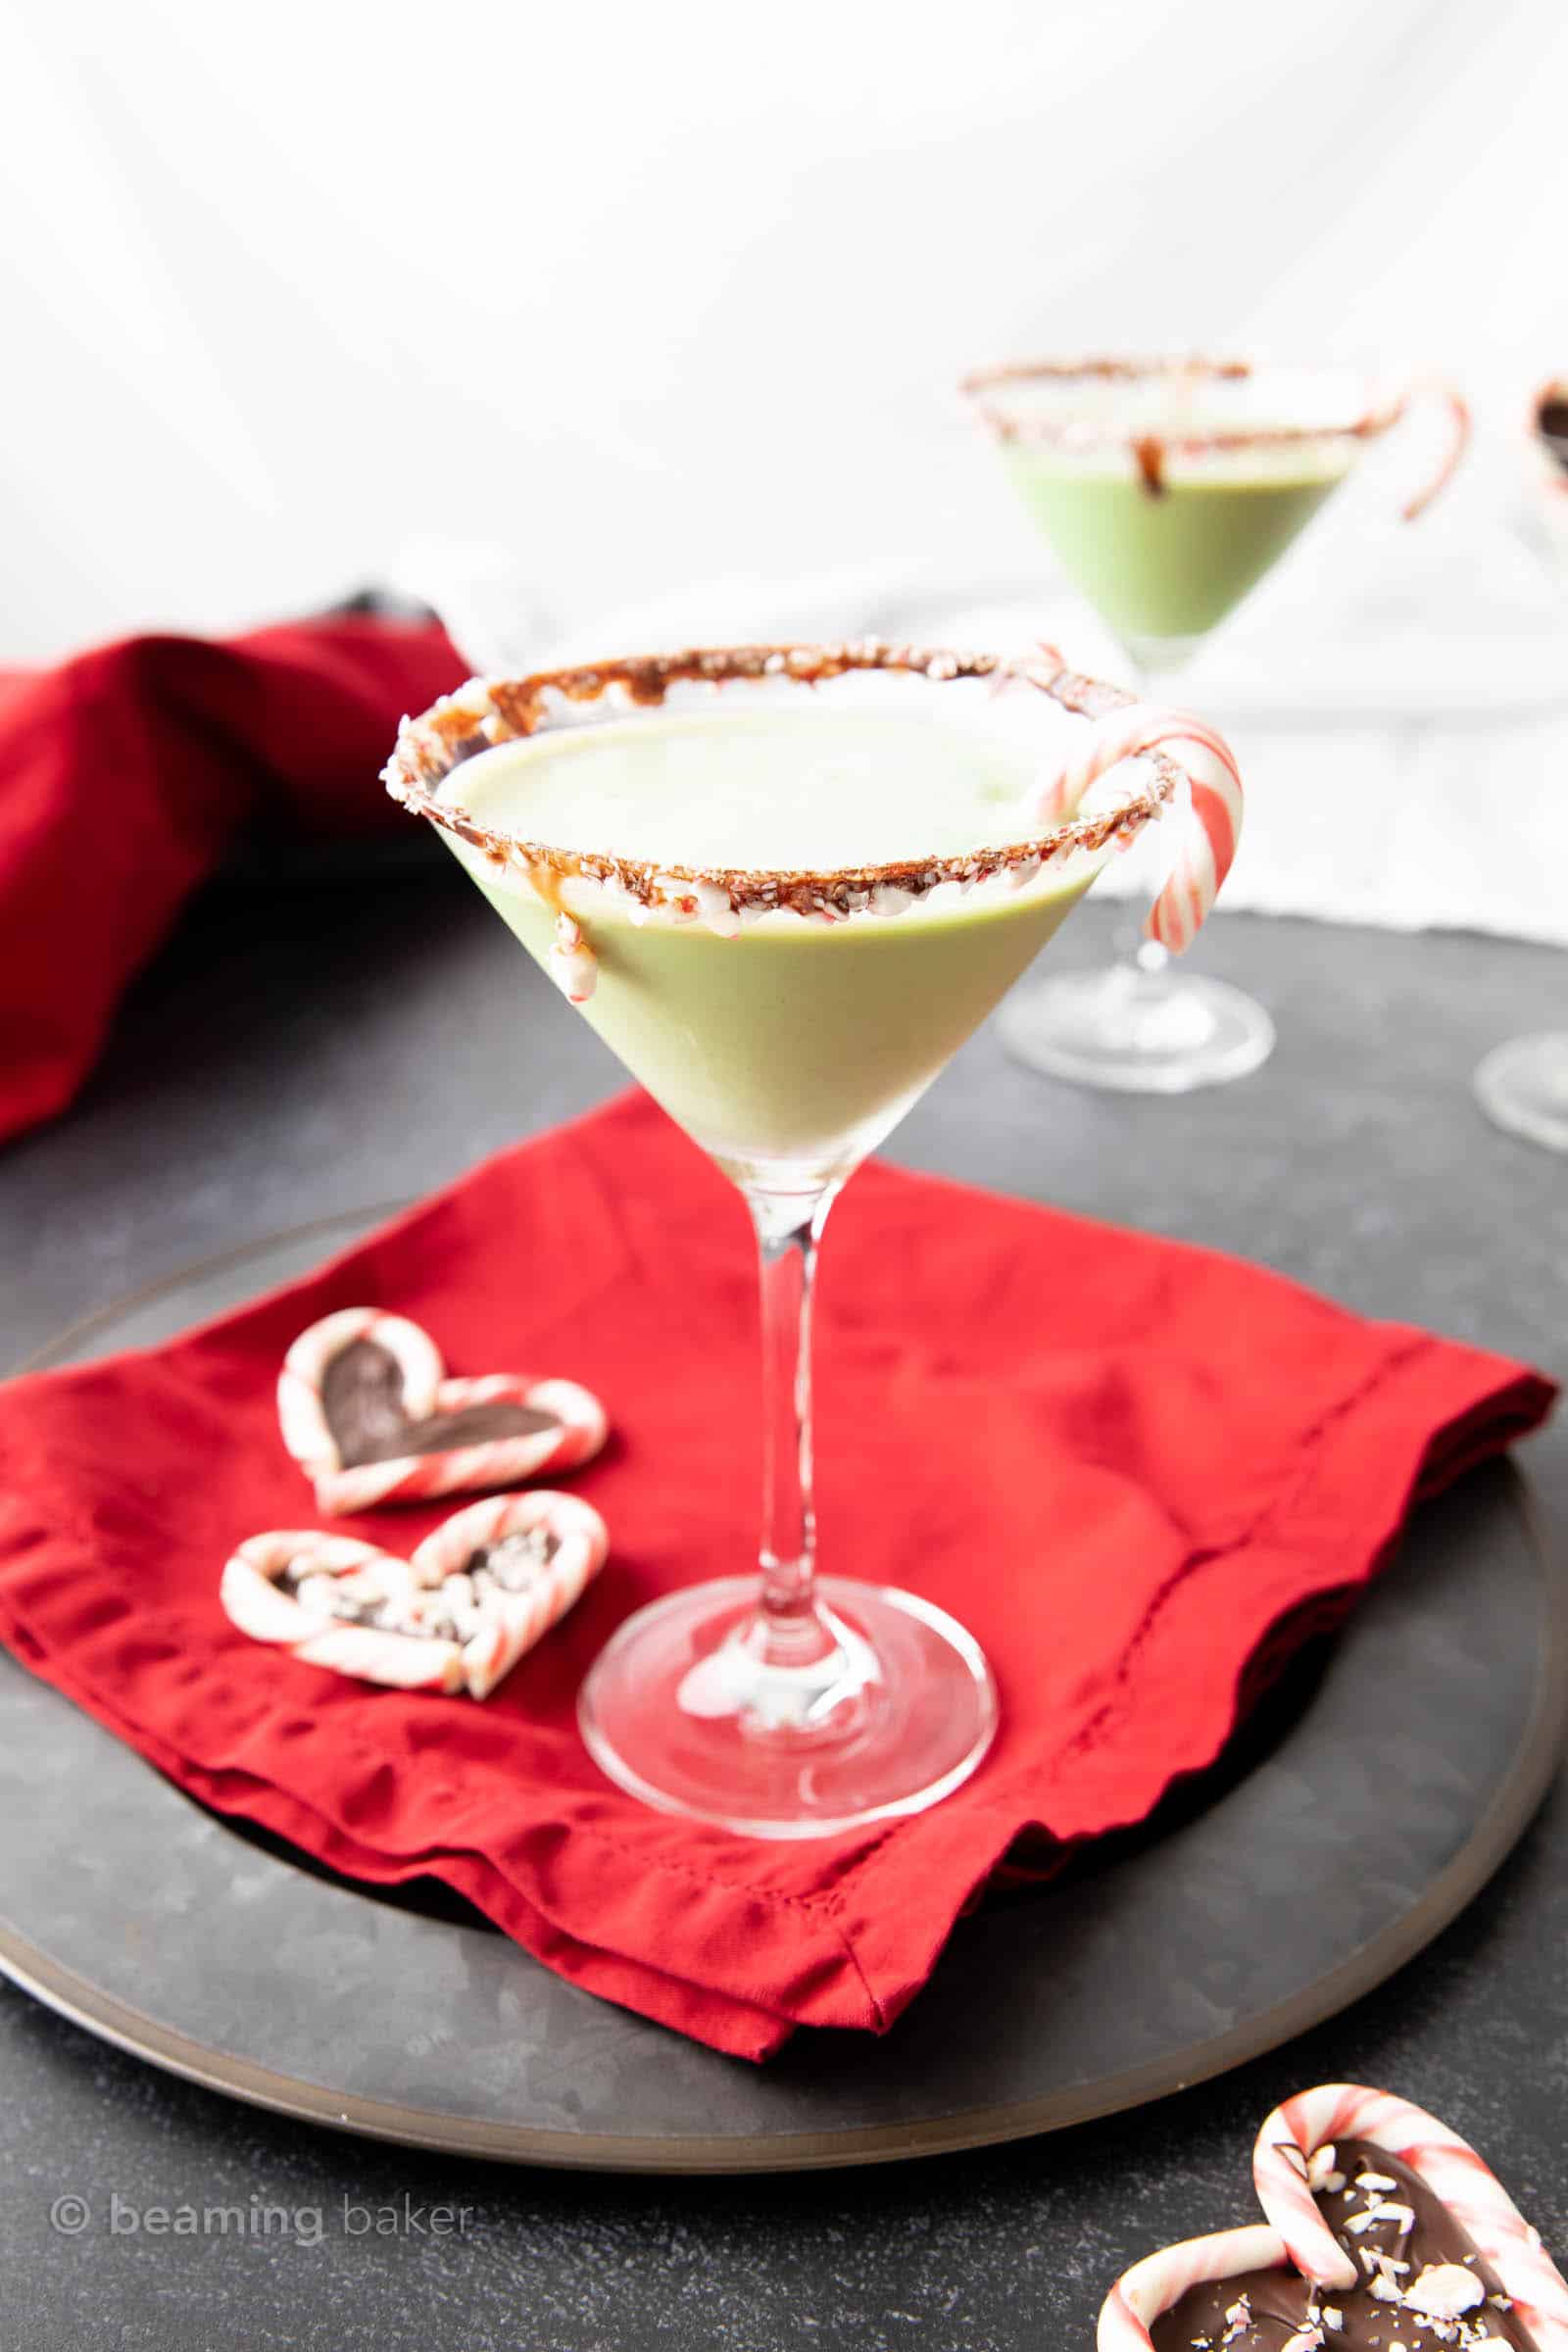 Chocolate mint martini on a red cloth with candy cane hearts and another martini in the background